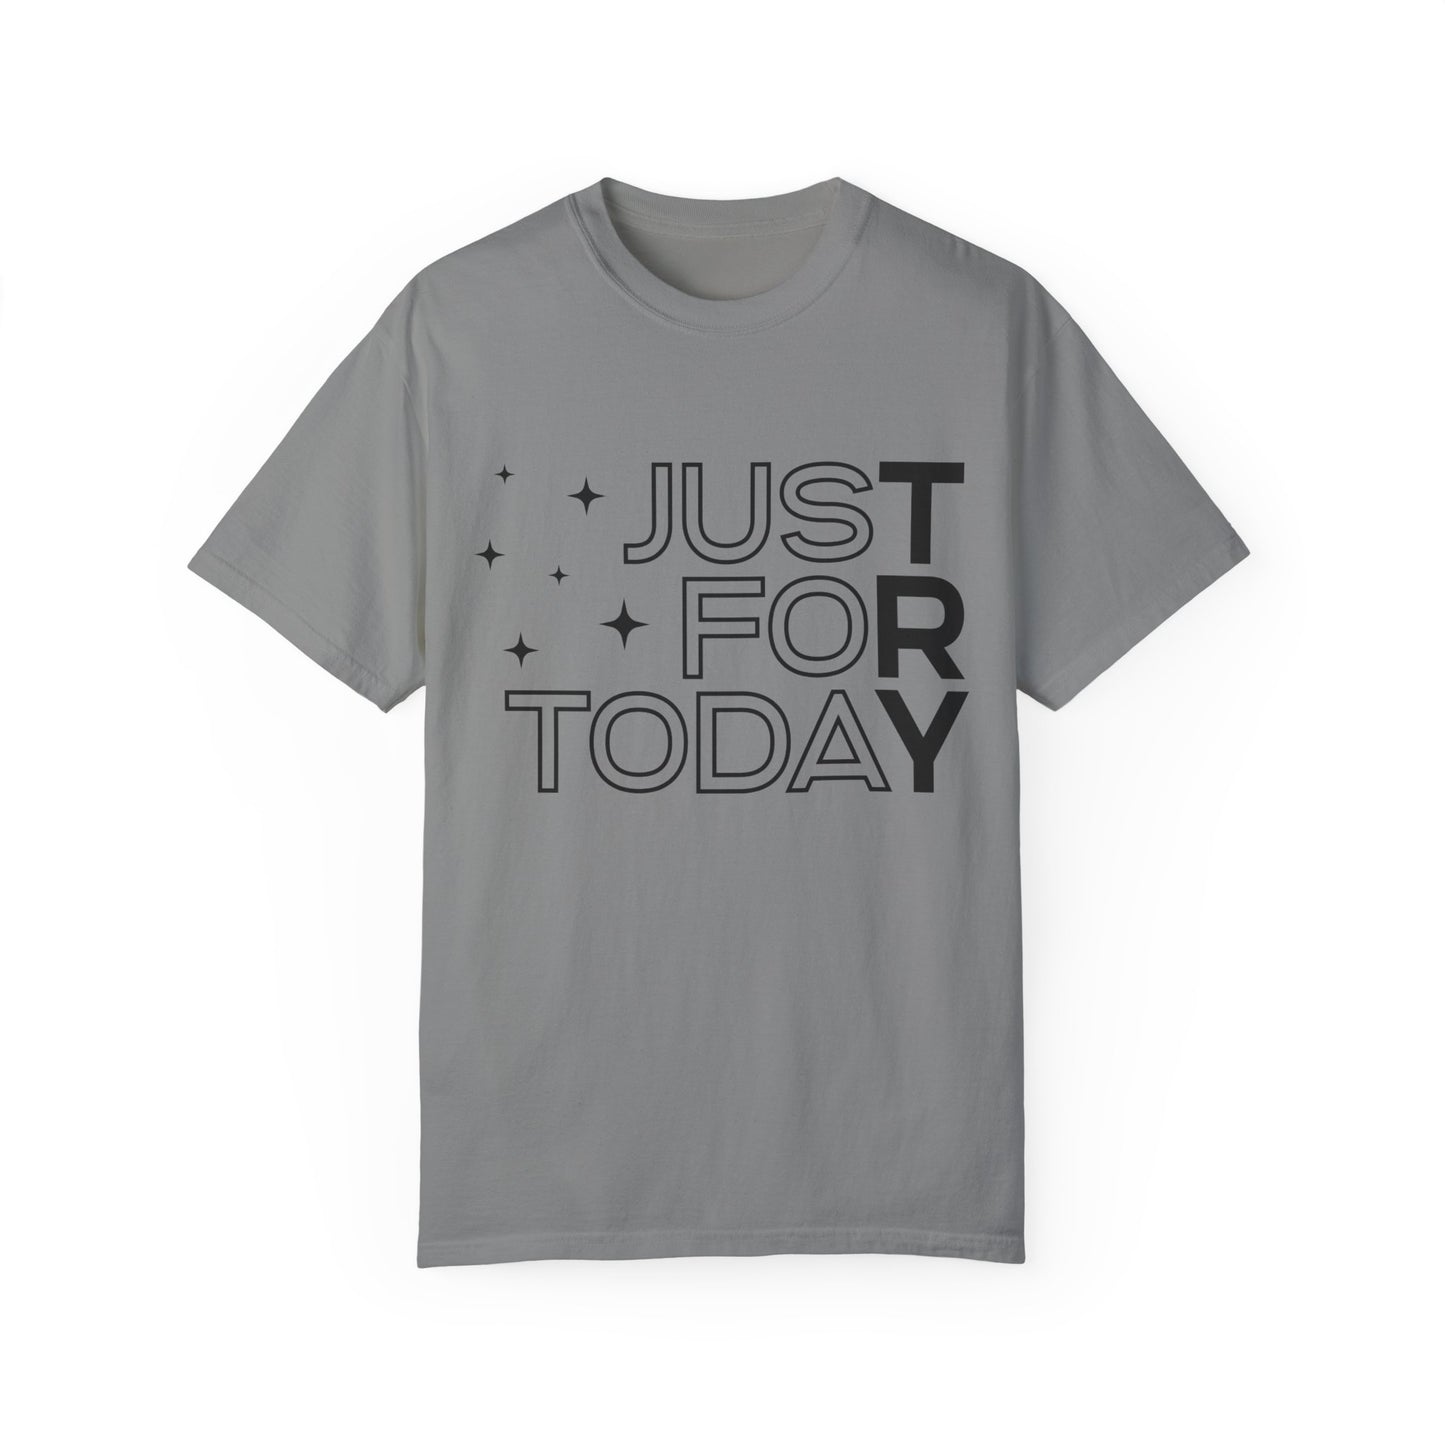 Just For Today Unisex Garment-Dyed T-shirt